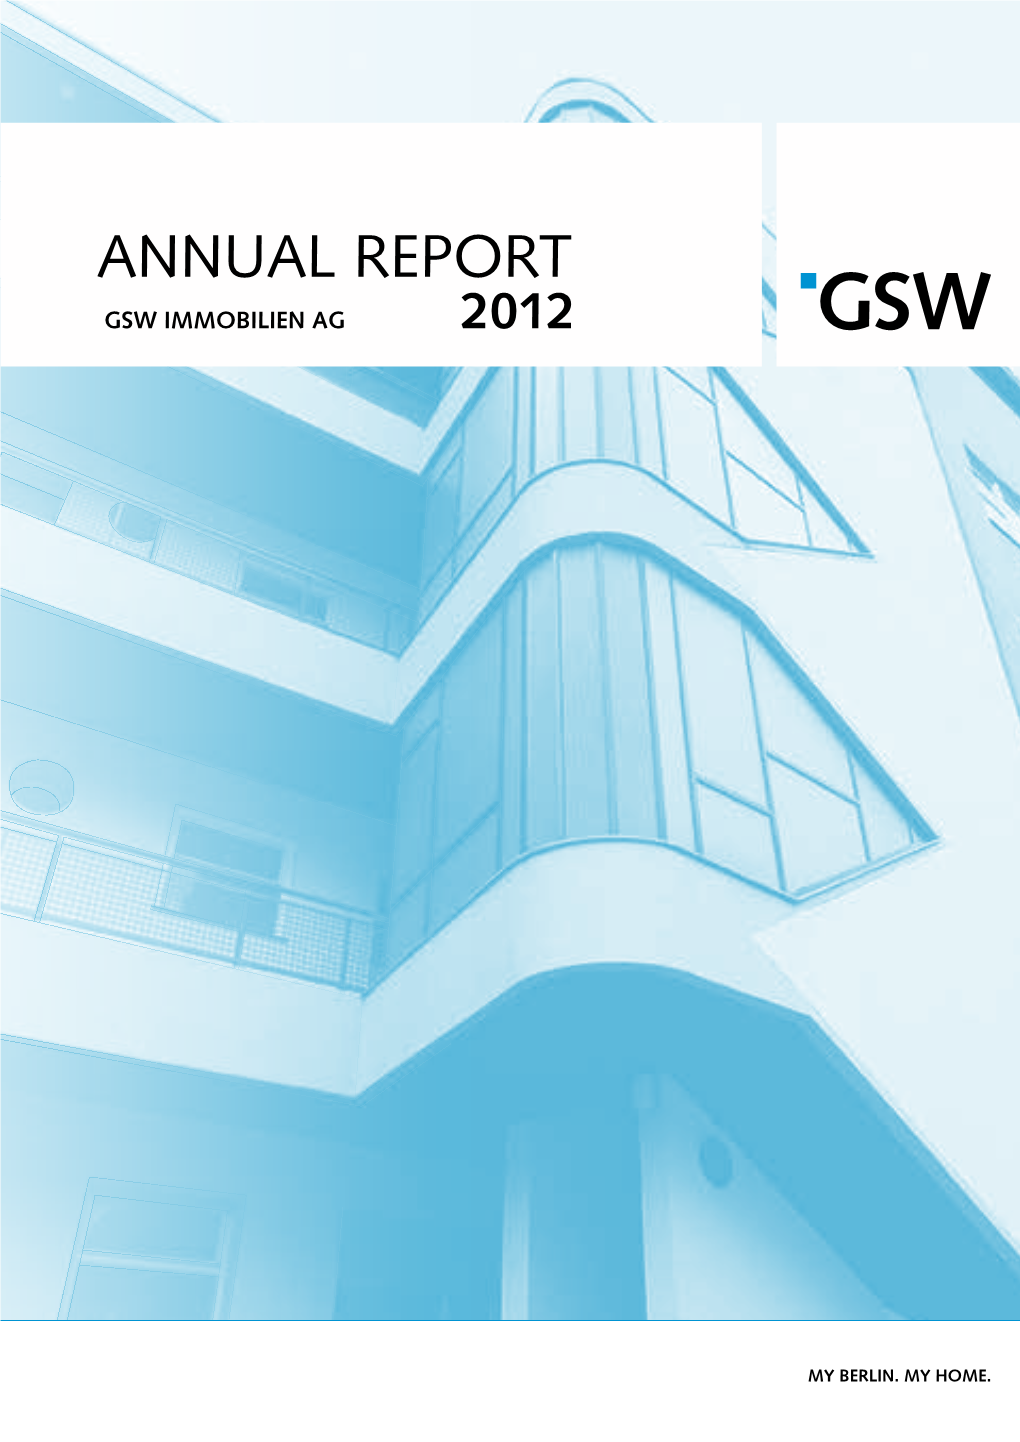 Annual Report 2012 GSW Immobilien AG